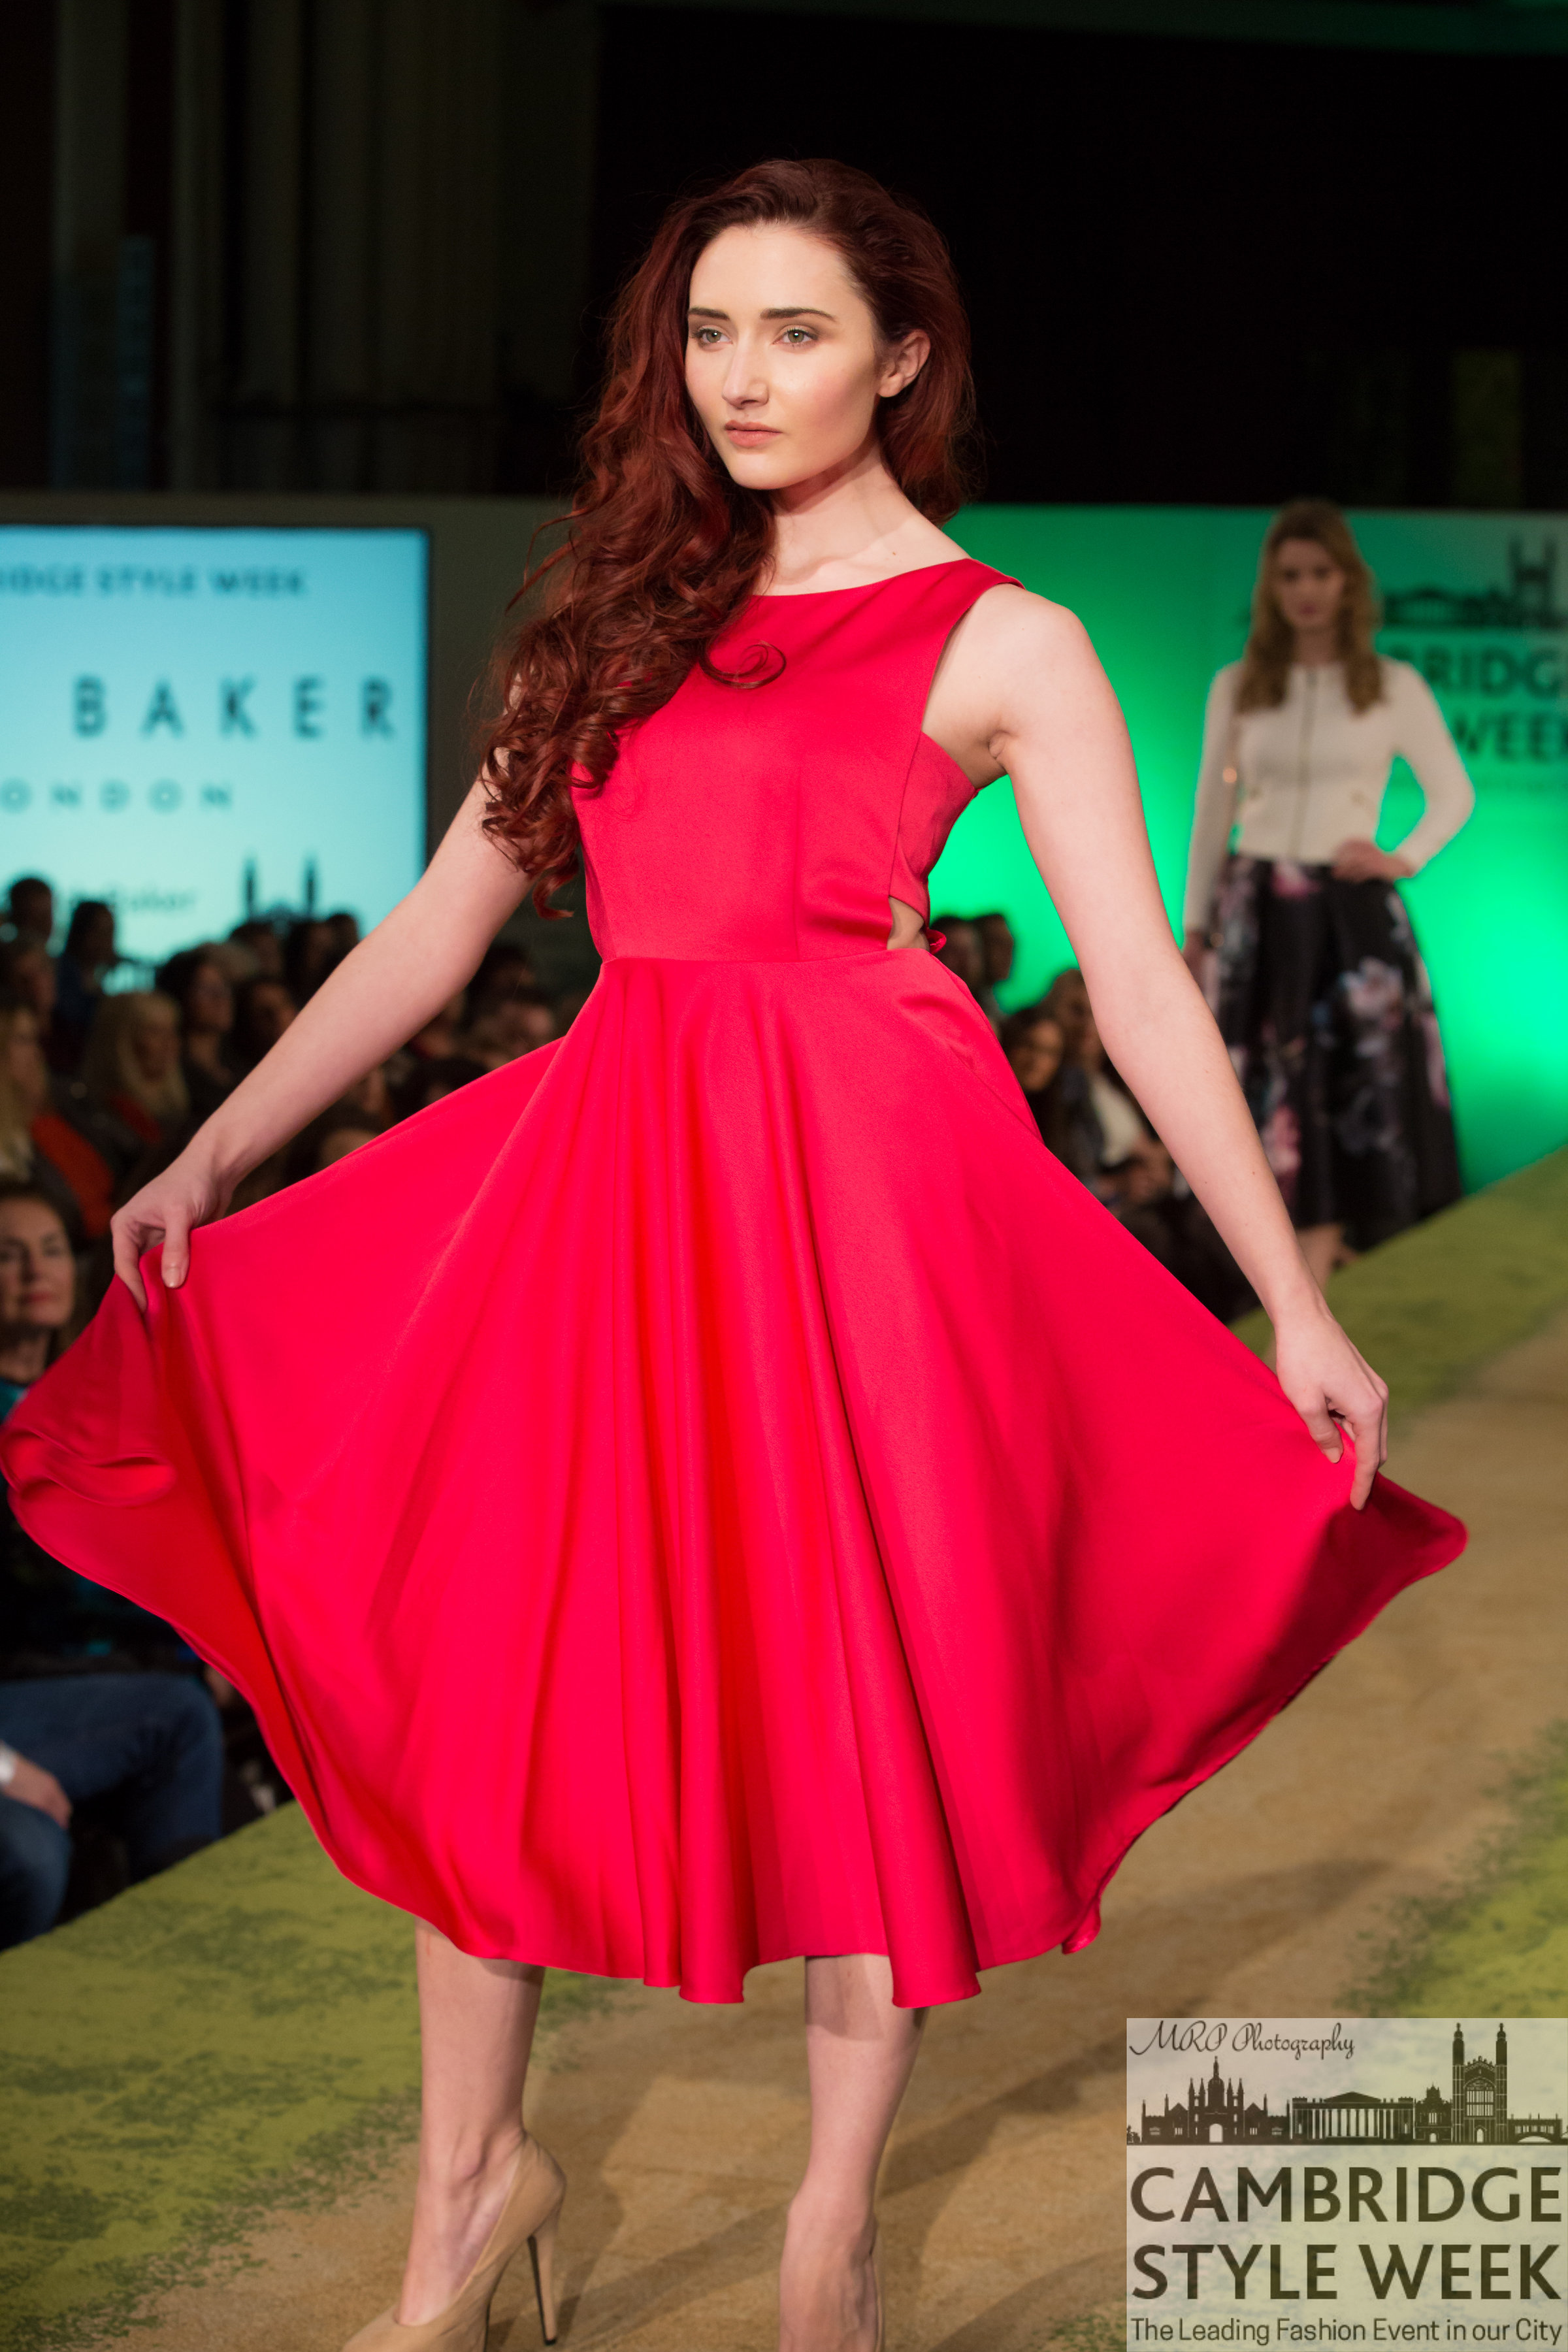  Cambridge Style Week 2016  Designer: Ted Baker  Make Up: Younique  Hair:  Top to Toe   Photographer:  Mark Peers  